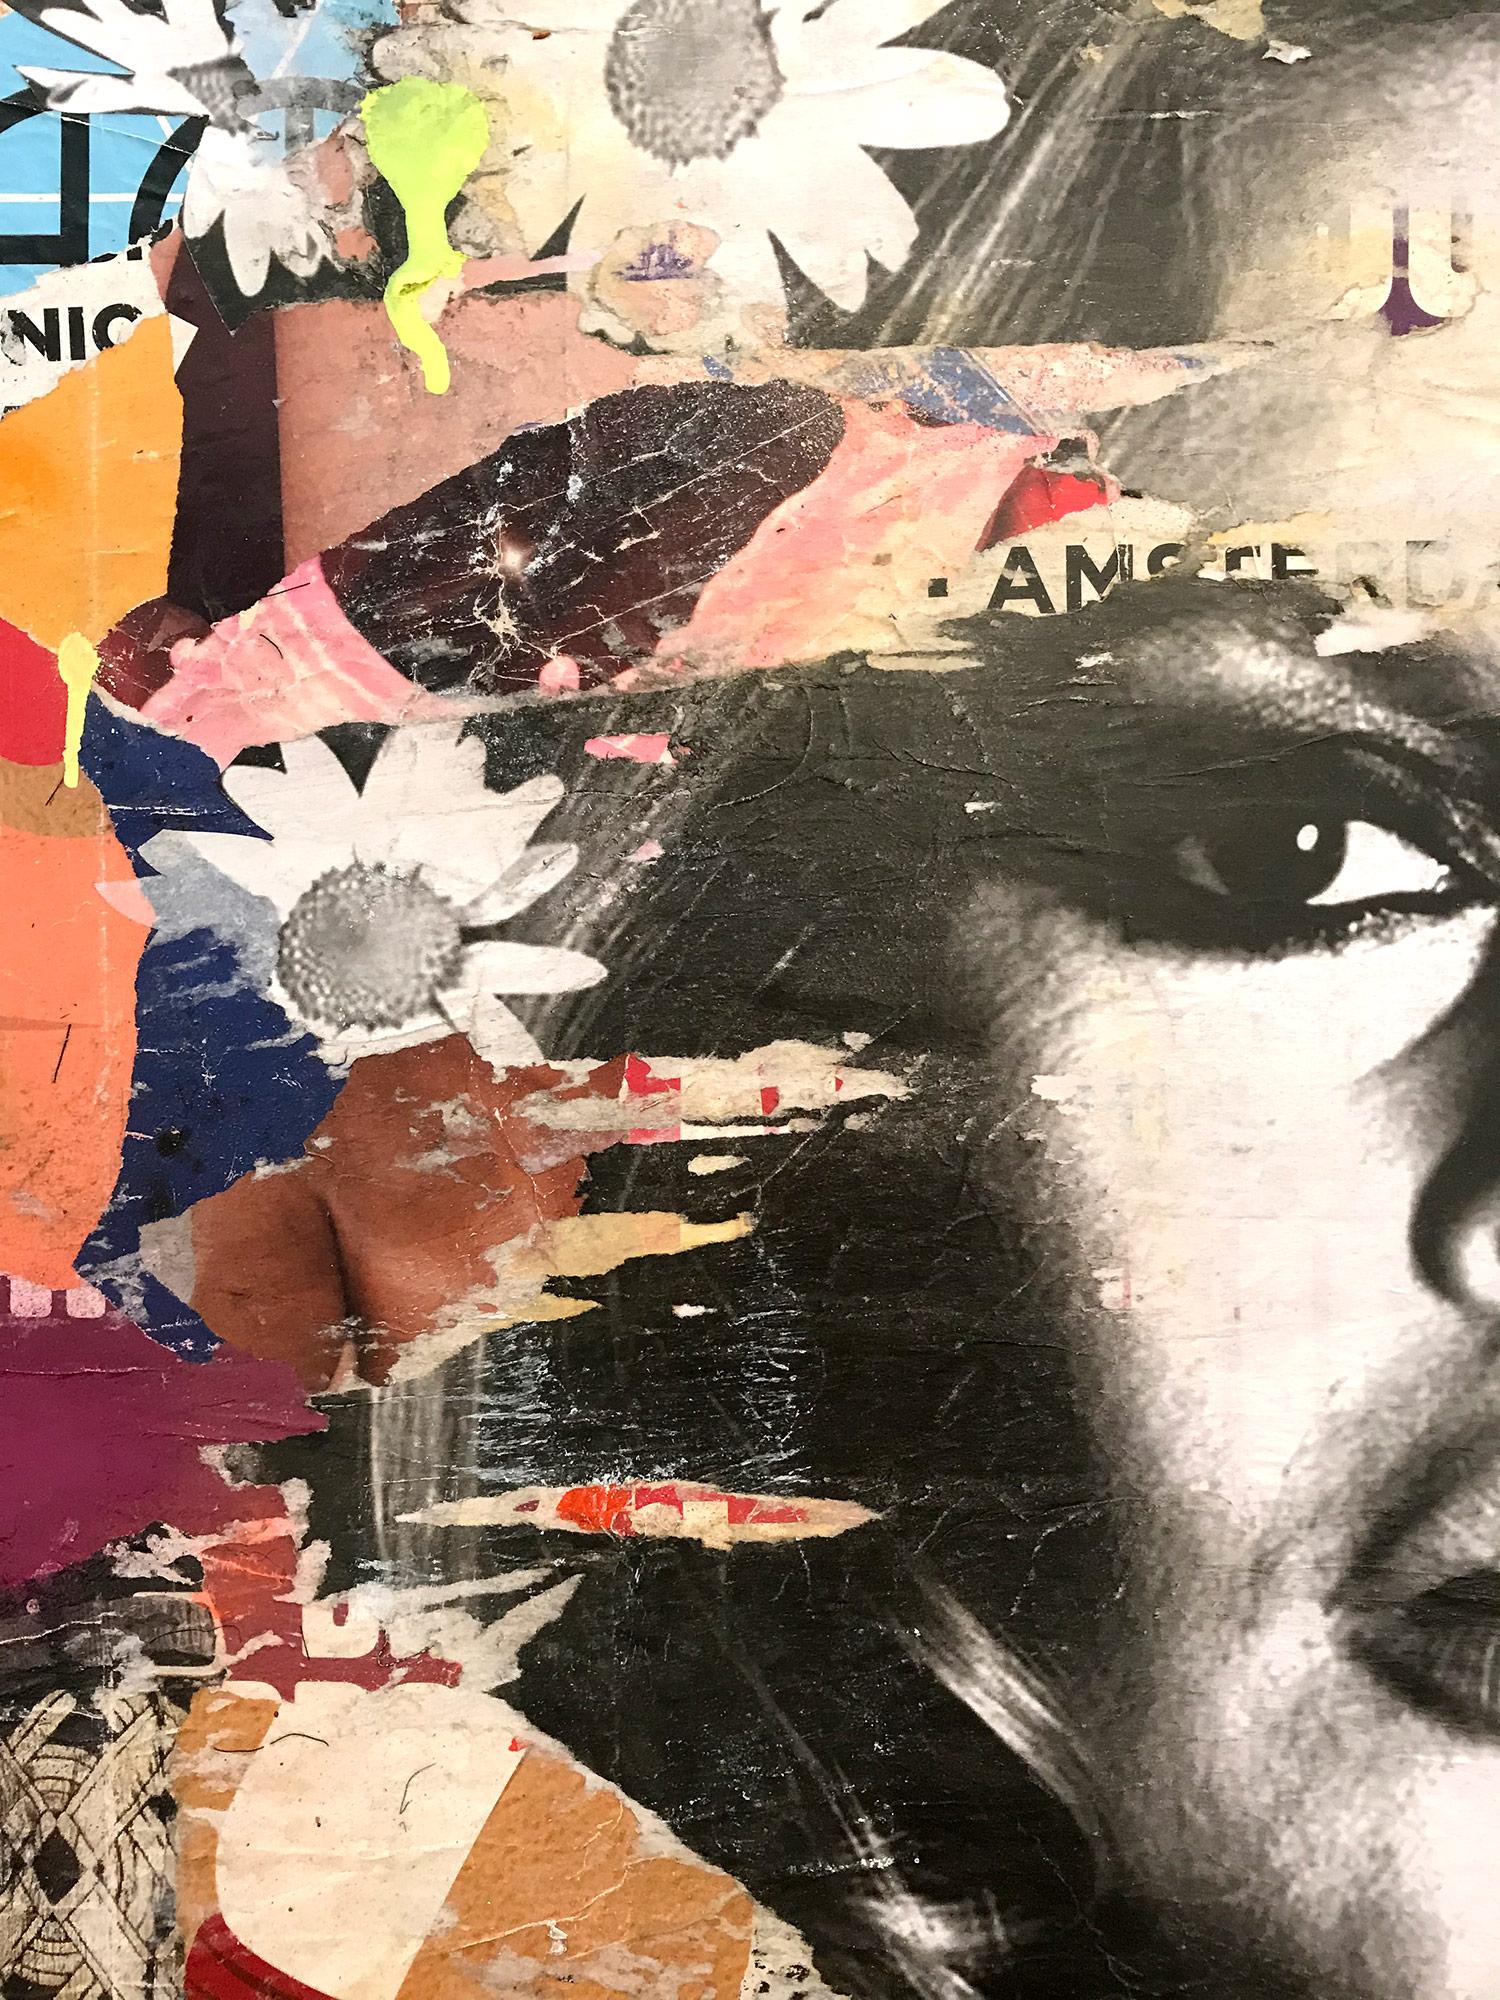 This piece depicts famous French actress and model Brigitte Bardot. Done with beautiful expressive colors and a distinctive street art design, this piece pops with energy and a romantic beauty. Its composition and bold collage makes a wonderful